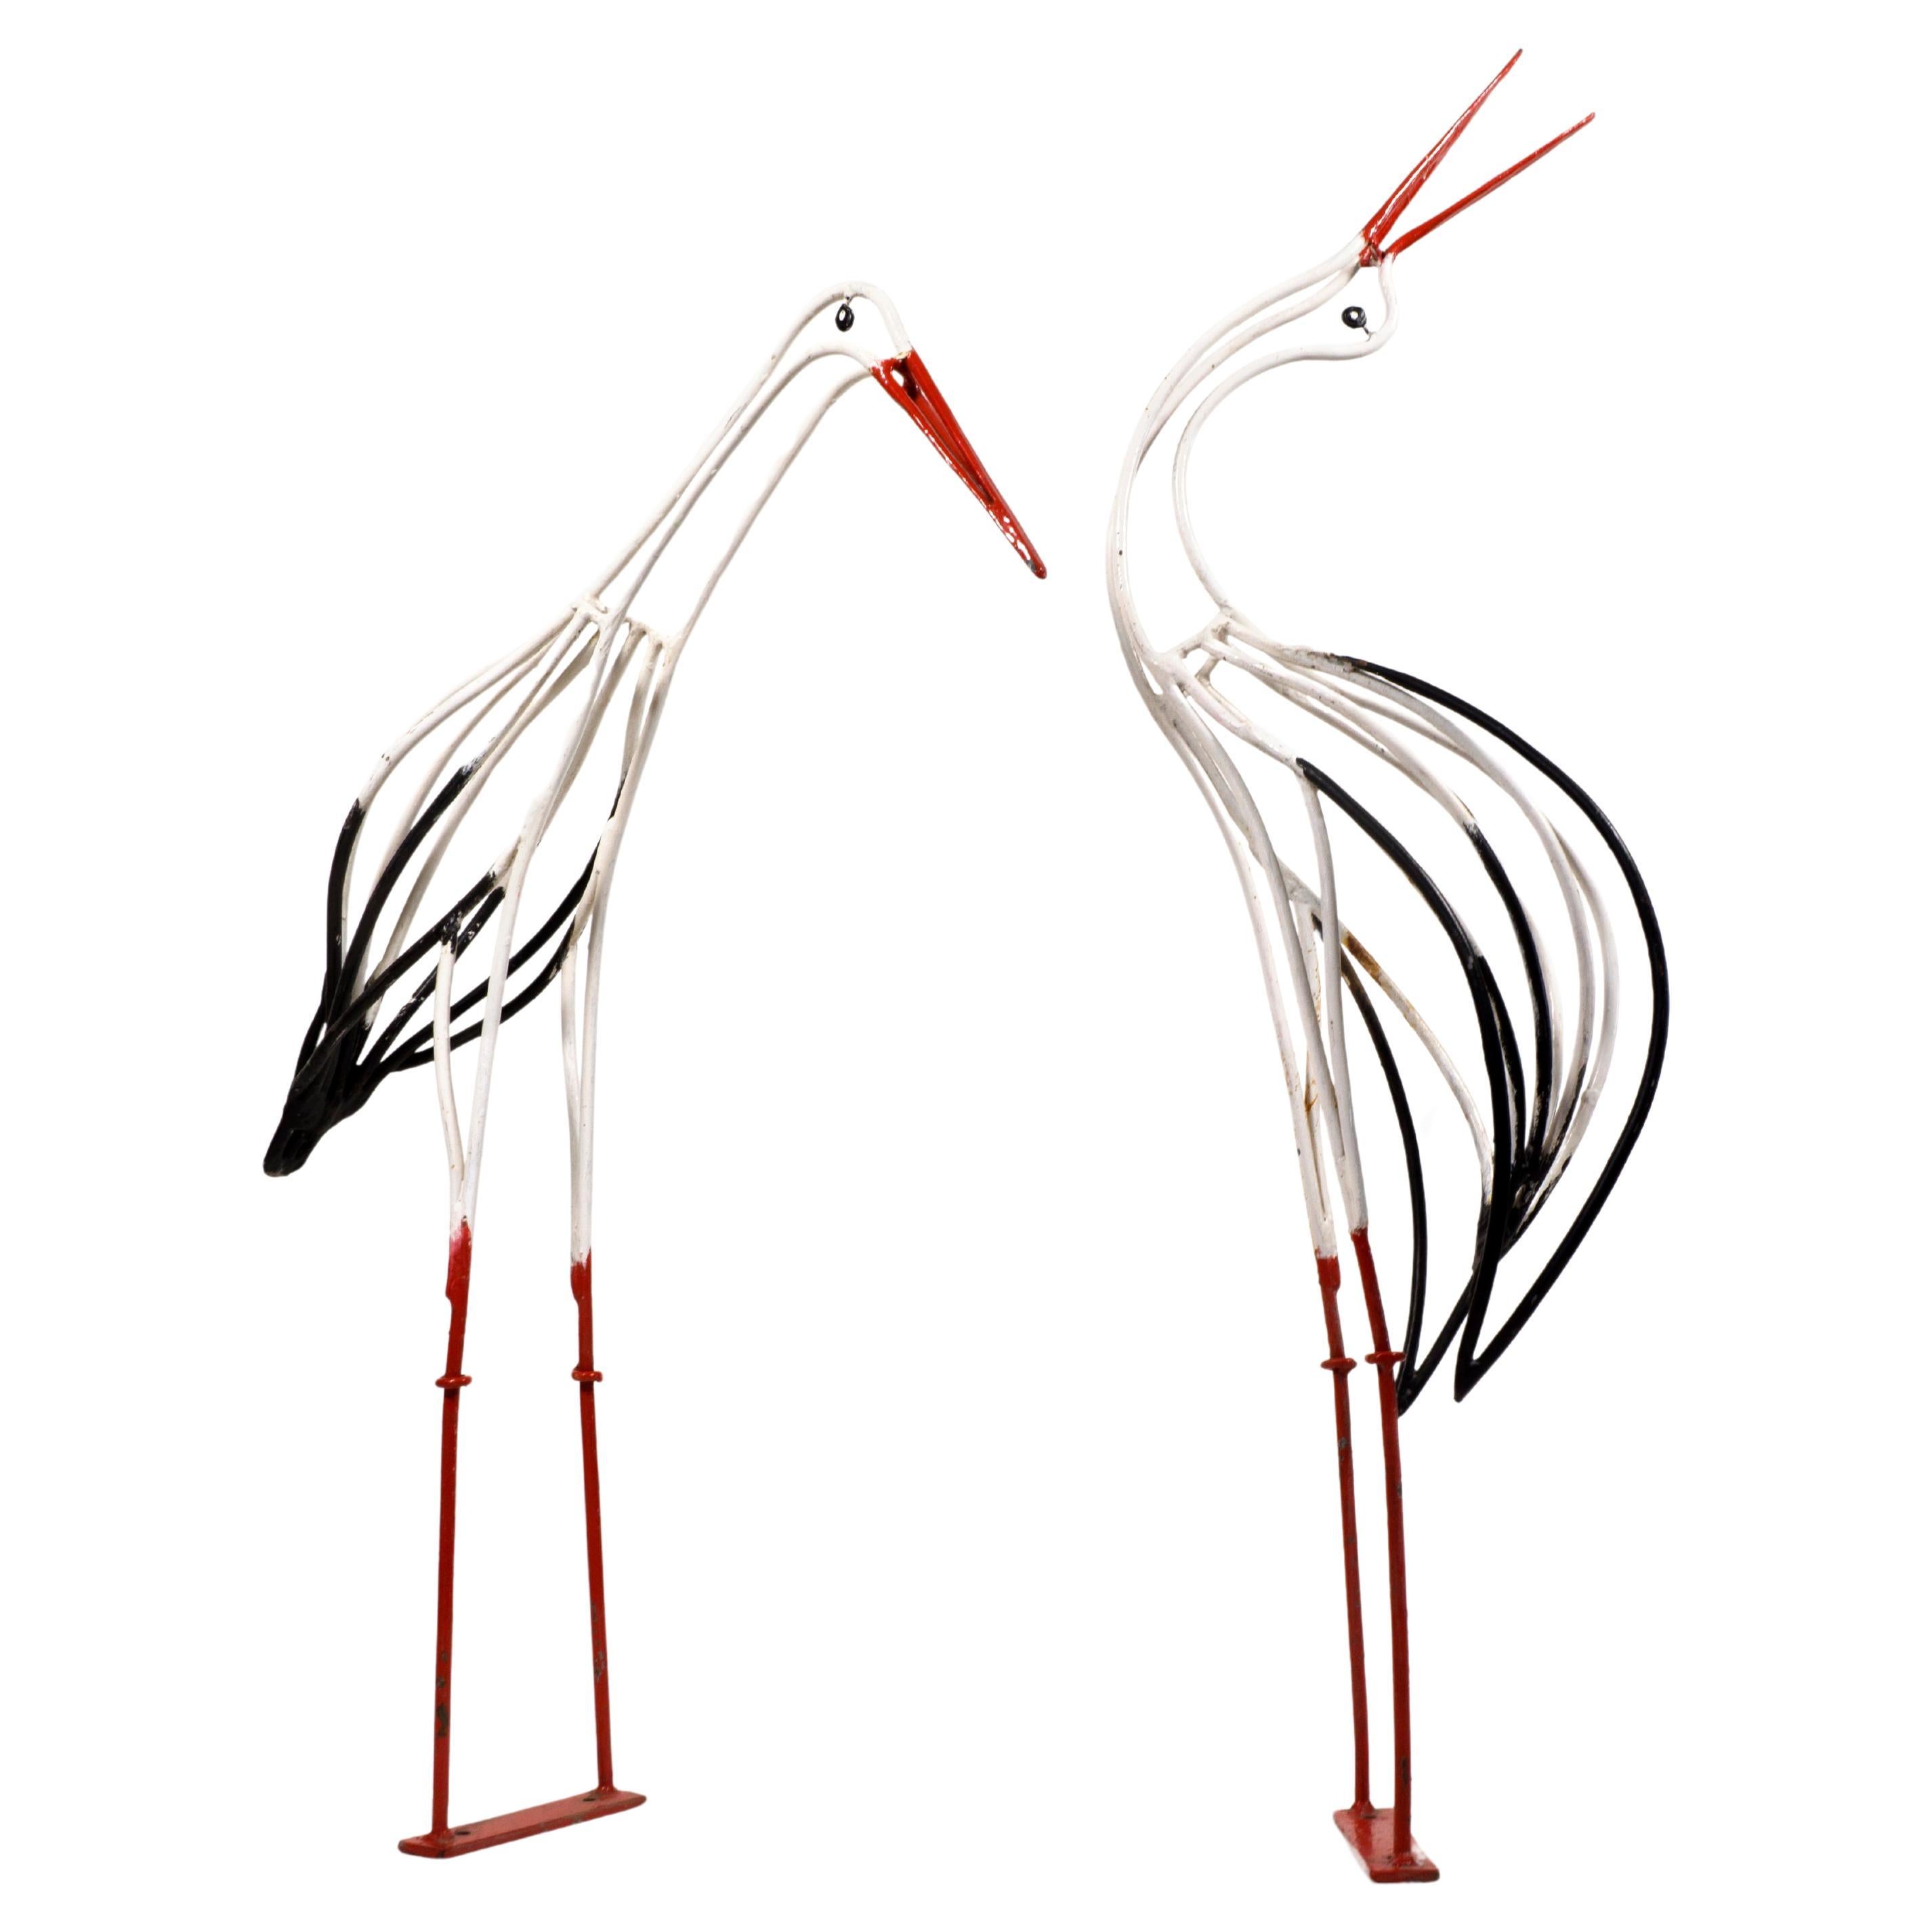 Lovely Midcentury Life-size Pair of 1950s Wrought Iron Stork Sculptures For Sale